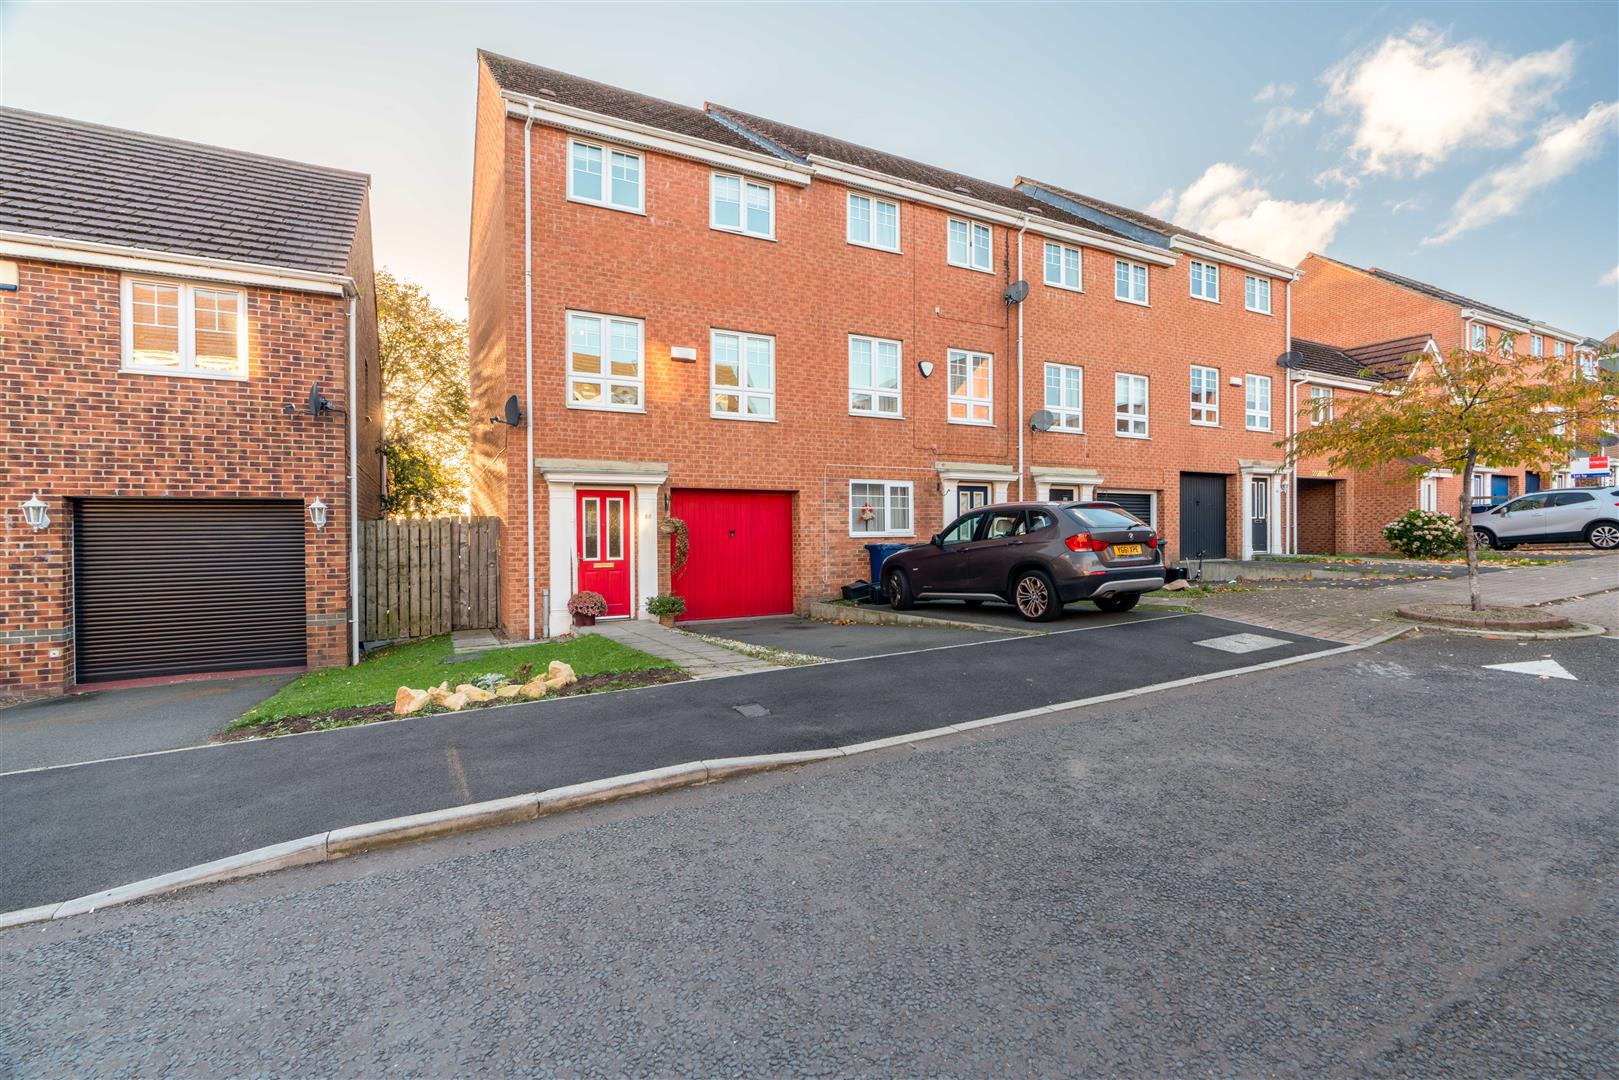 4 bed town house for sale in Skendleby Drive, Newcastle Upon Tyne, NE3 